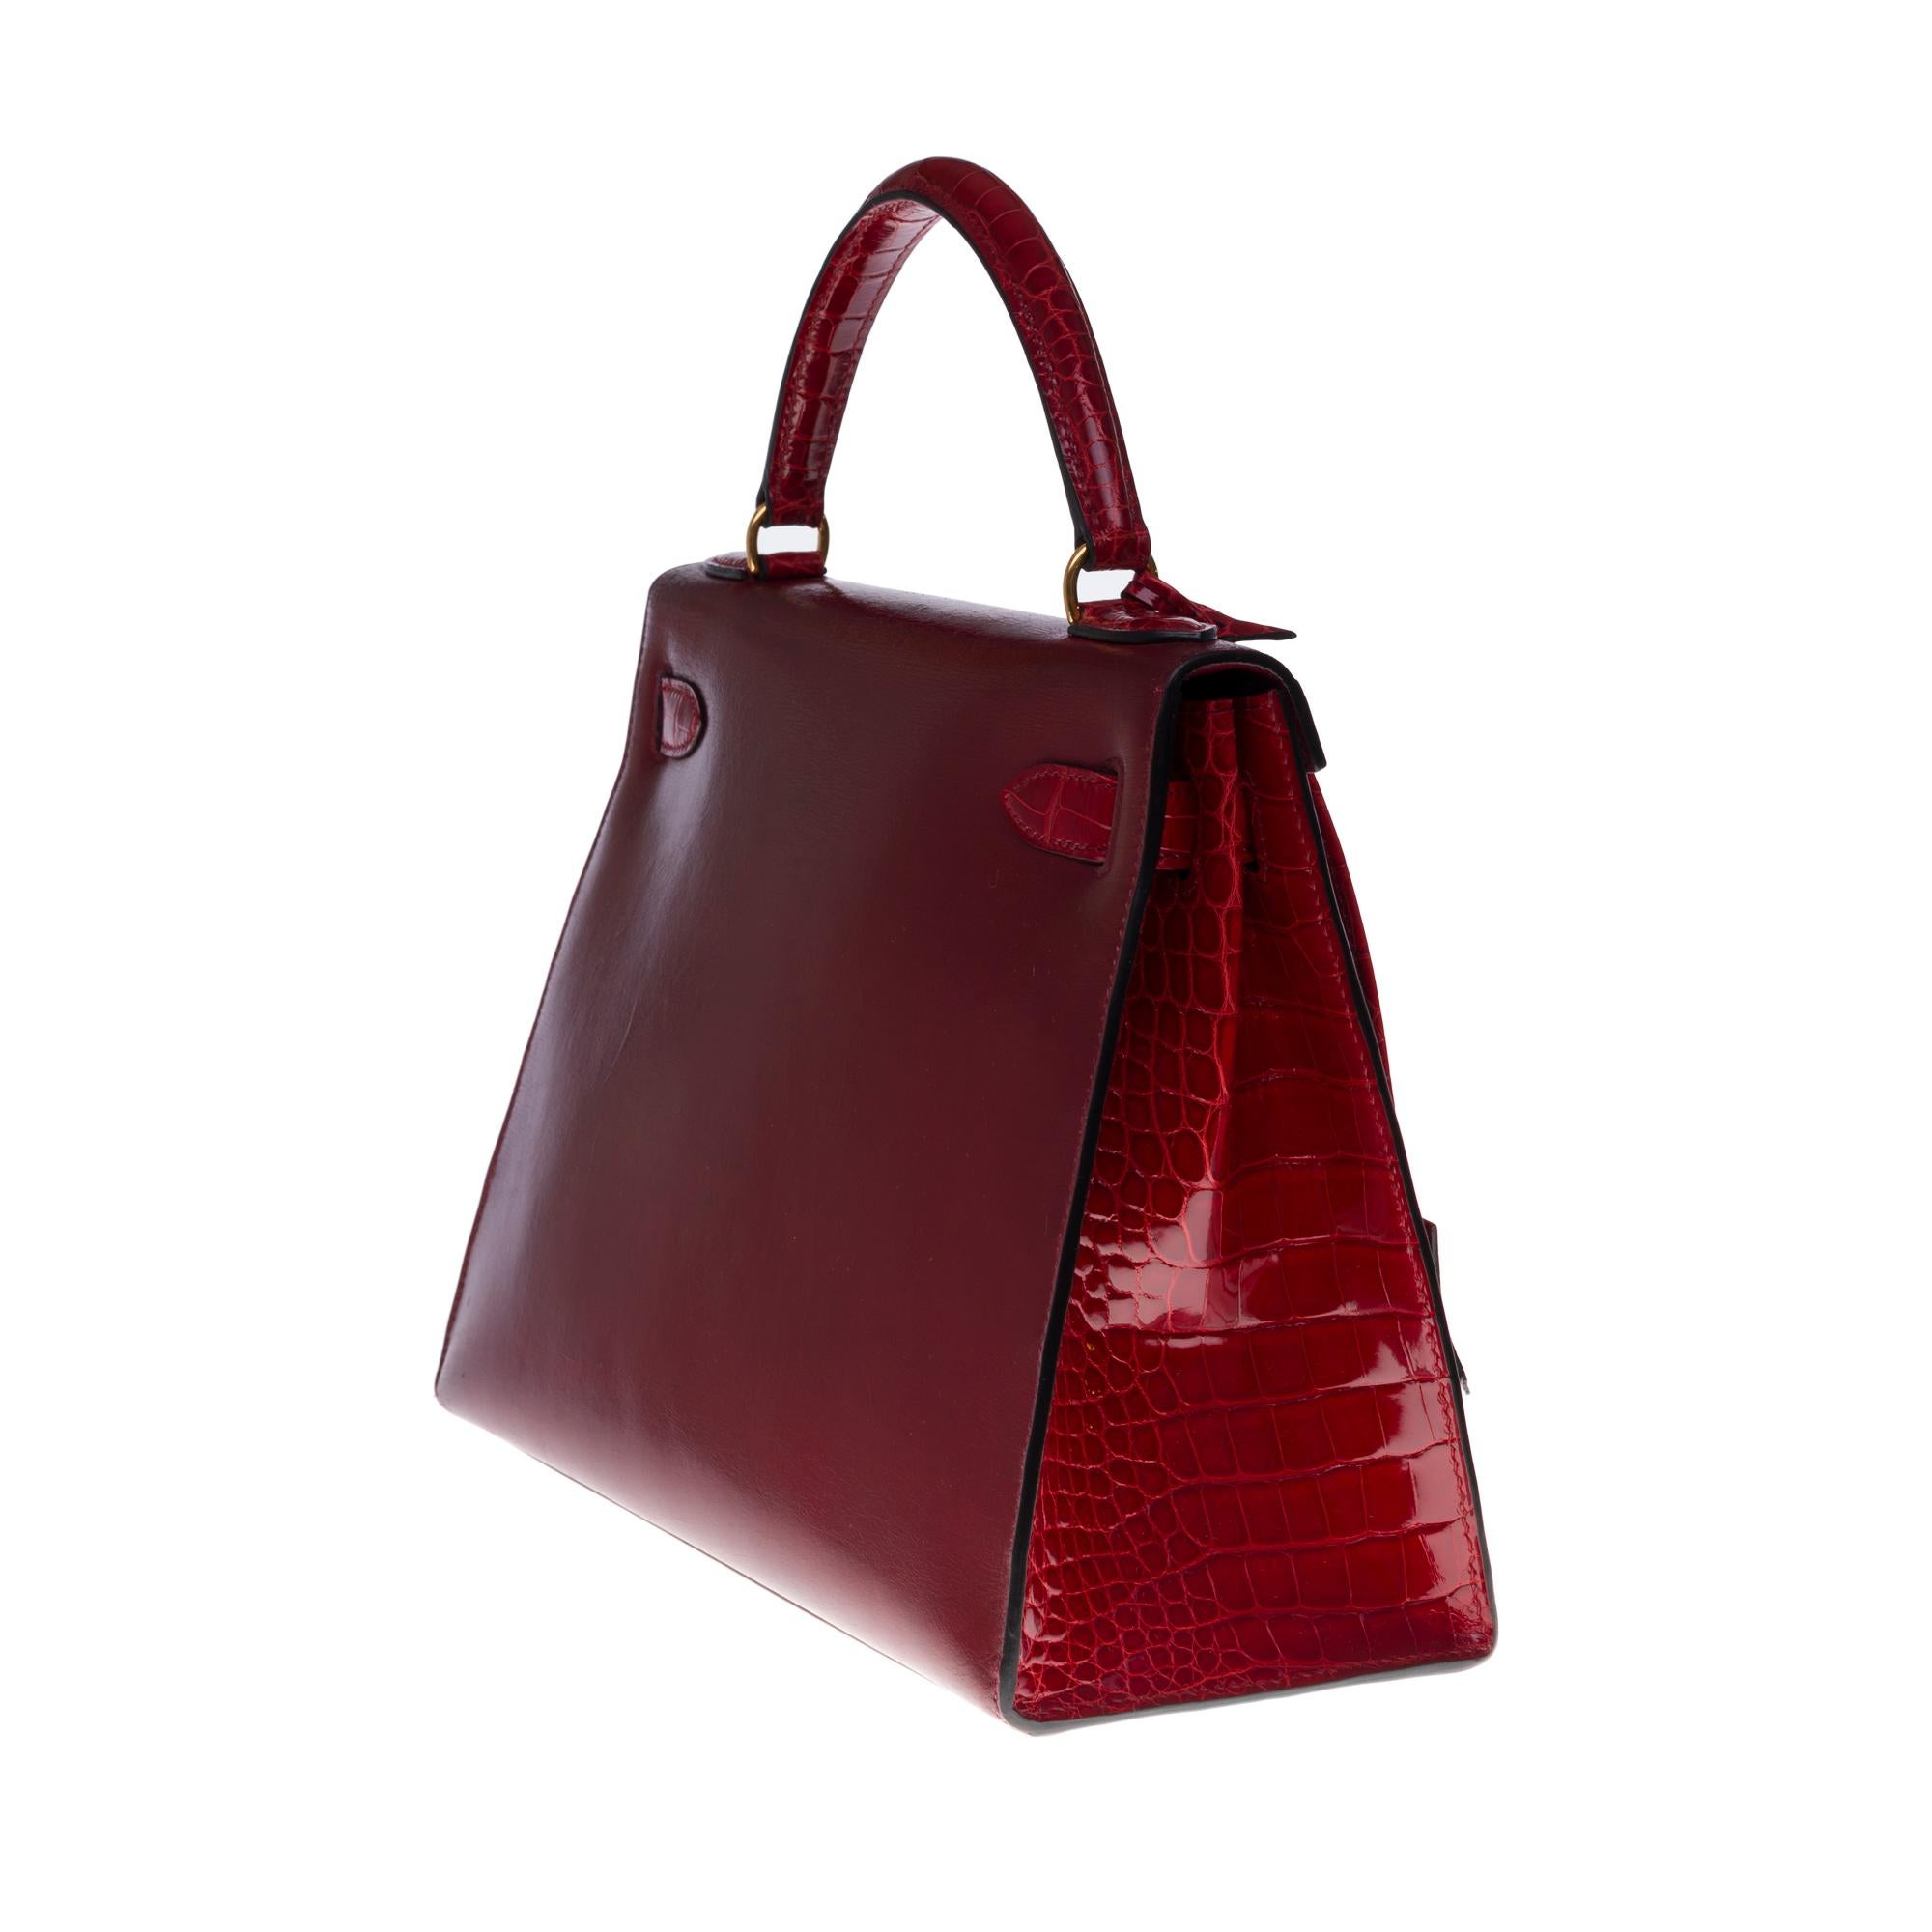 Women's Customized Hermès Kelly 32 in Rouge H calfskin strap with Red Crocodile, GHW 